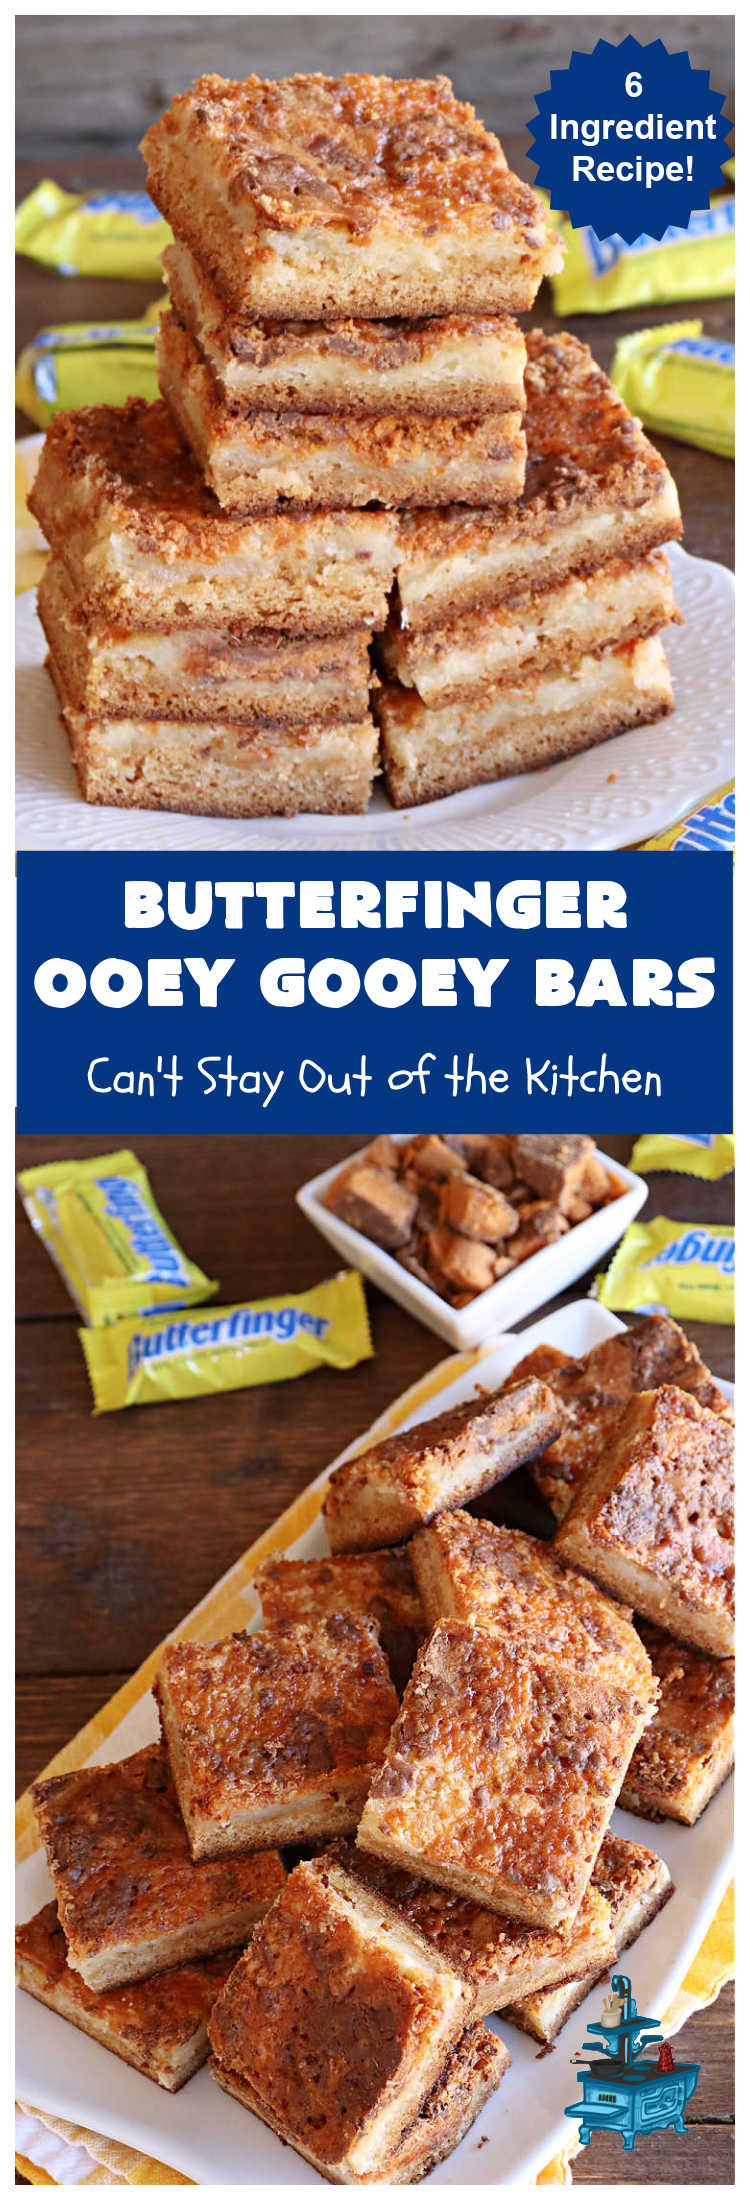 Butterfinger Ooey Gooey Bars | Can't Stay Out of the Kitchen | these lovely #OoeyGooeyBars include a #Cheesecake filling with chopped #Butterfingers on top! This easy 6-ingredient #recipe is so irresistible everyone will want seconds. They are out of this world good & will have you swooning from the first bite. Excellent for #tailgating, potlucks & a #ChristmasCookieExchange. #cookie #brownie #dessert #ButterfingerDessert #ButterfingerOoeyGooeyBarsButterfinger Ooey Gooey Bars | Can't Stay Out of the Kitchen | these lovely #OoeyGooeyBars include a #Cheesecake filling with chopped #Butterfingers on top! This easy 6-ingredient #recipe is so irresistible everyone will want seconds. They are out of this world good & will have you swooning from the first bite. Excellent for #tailgating, potlucks & a #ChristmasCookieExchange. #cookie #brownie #dessert #ButterfingerDessert #ButterfingerOoeyGooeyBars